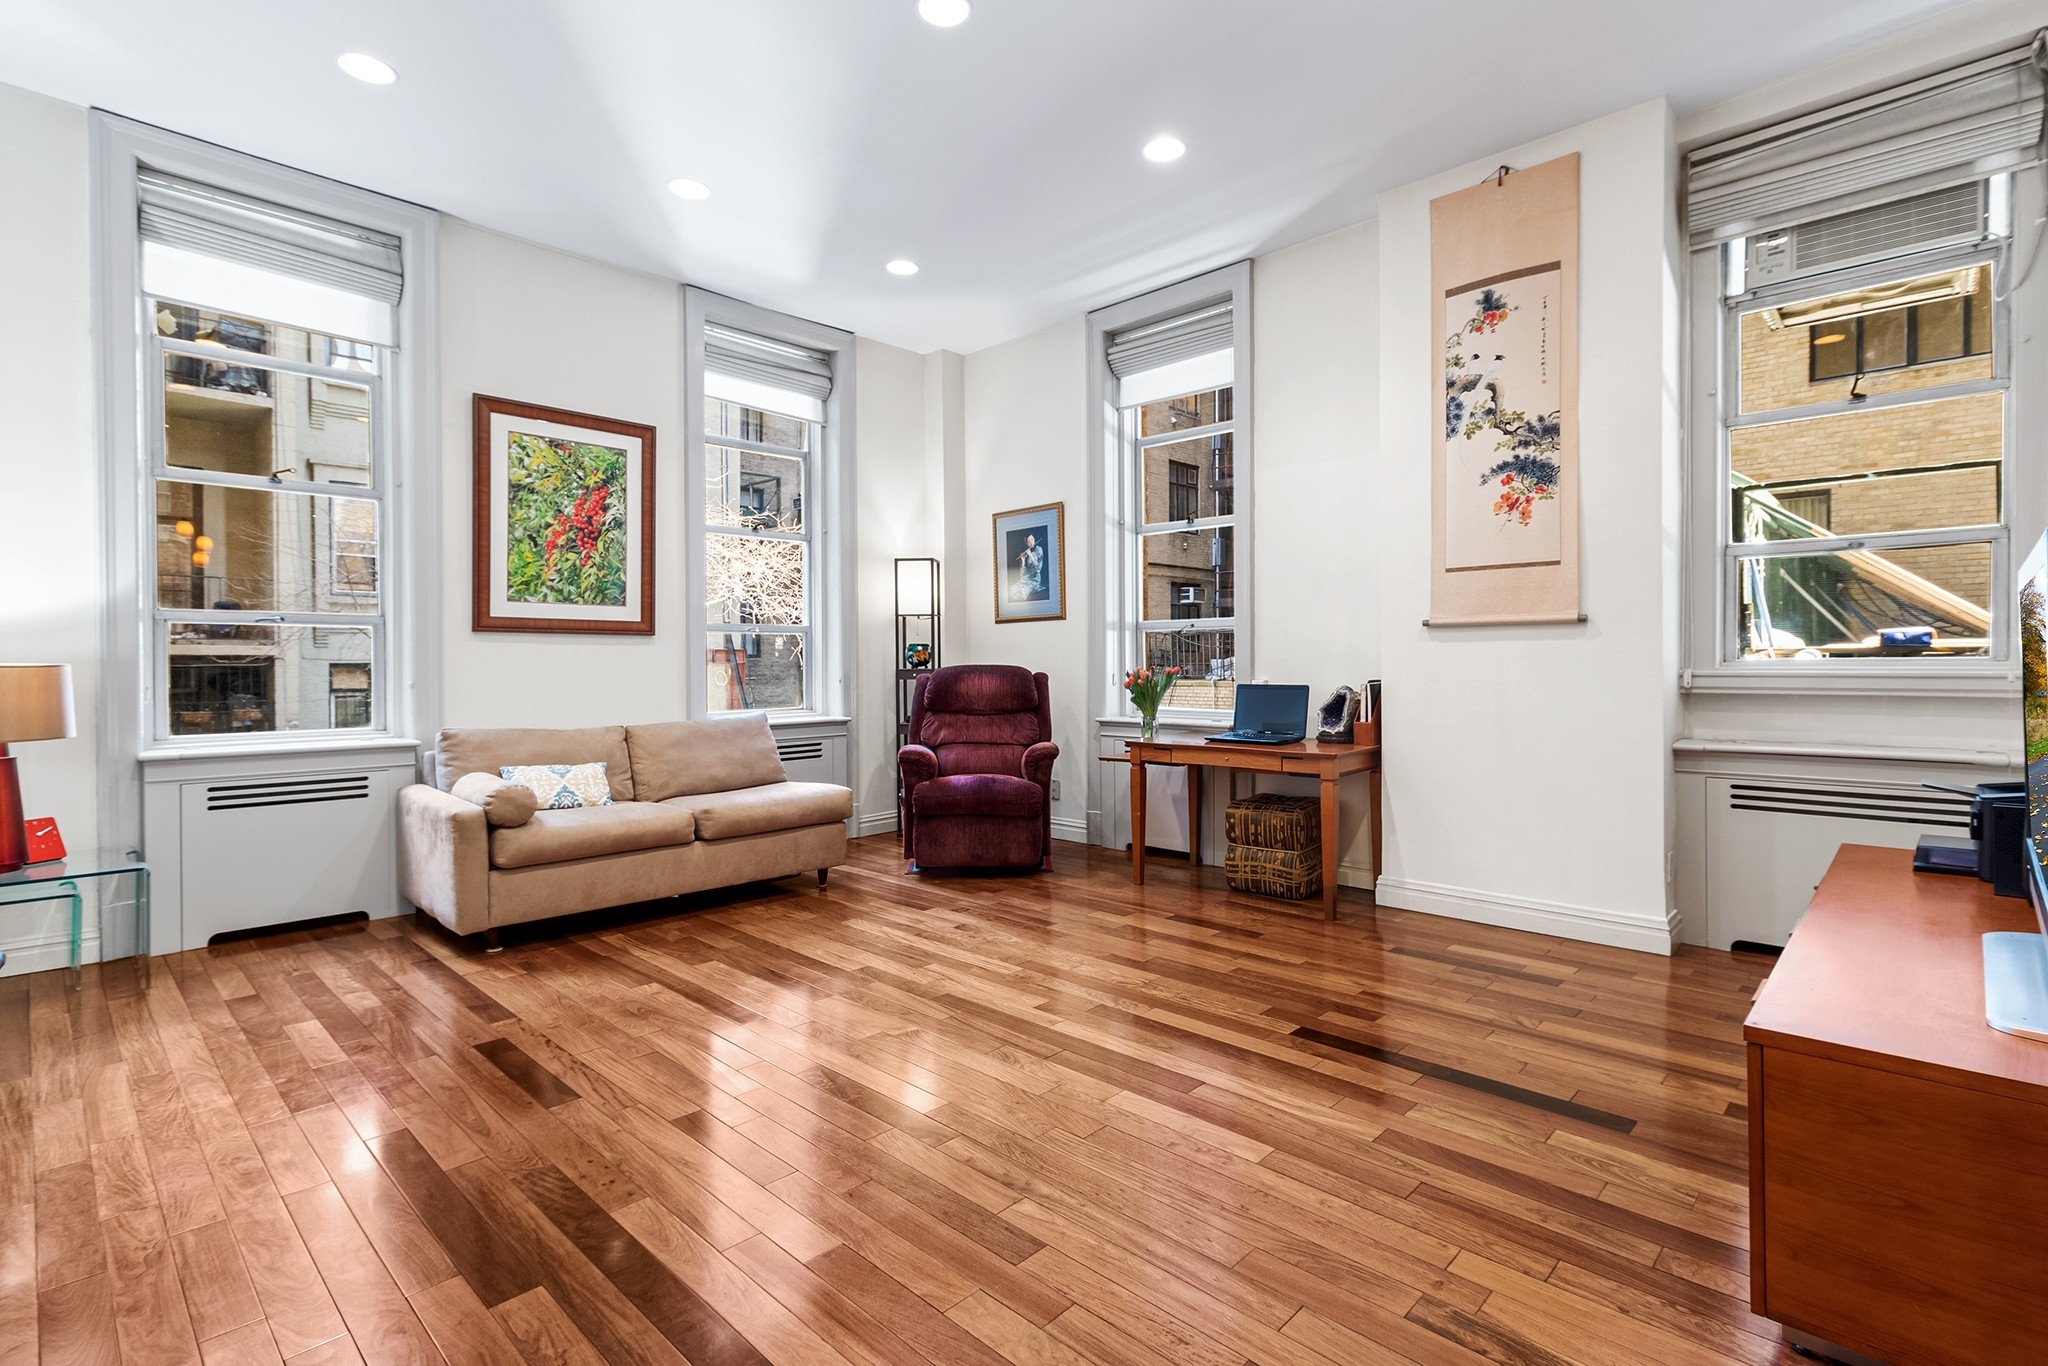 Co-op Properties for Sale at HAYDEN HOUSE, 11 W 81ST ST, 1C Upper West Side, New York, New York 10024